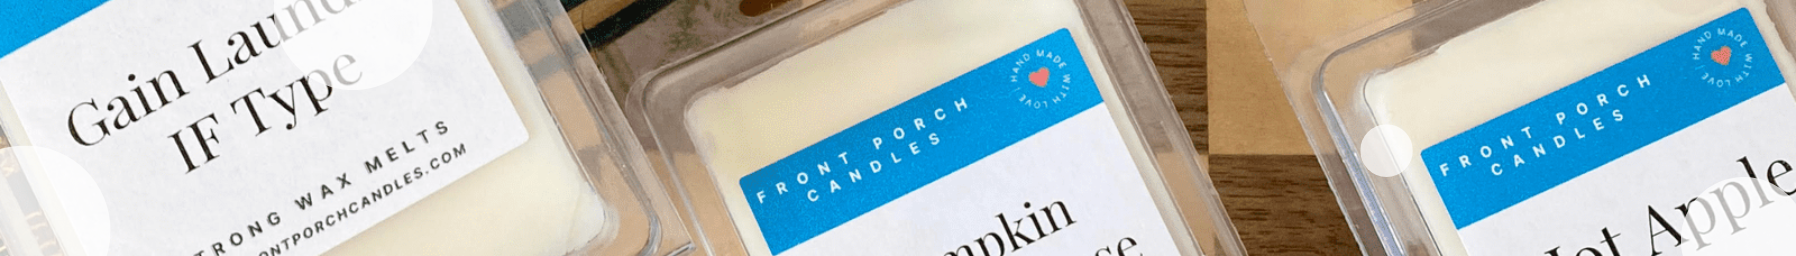 Front Porch Candle CO., INC. - New supplier on Syncee Marketplace